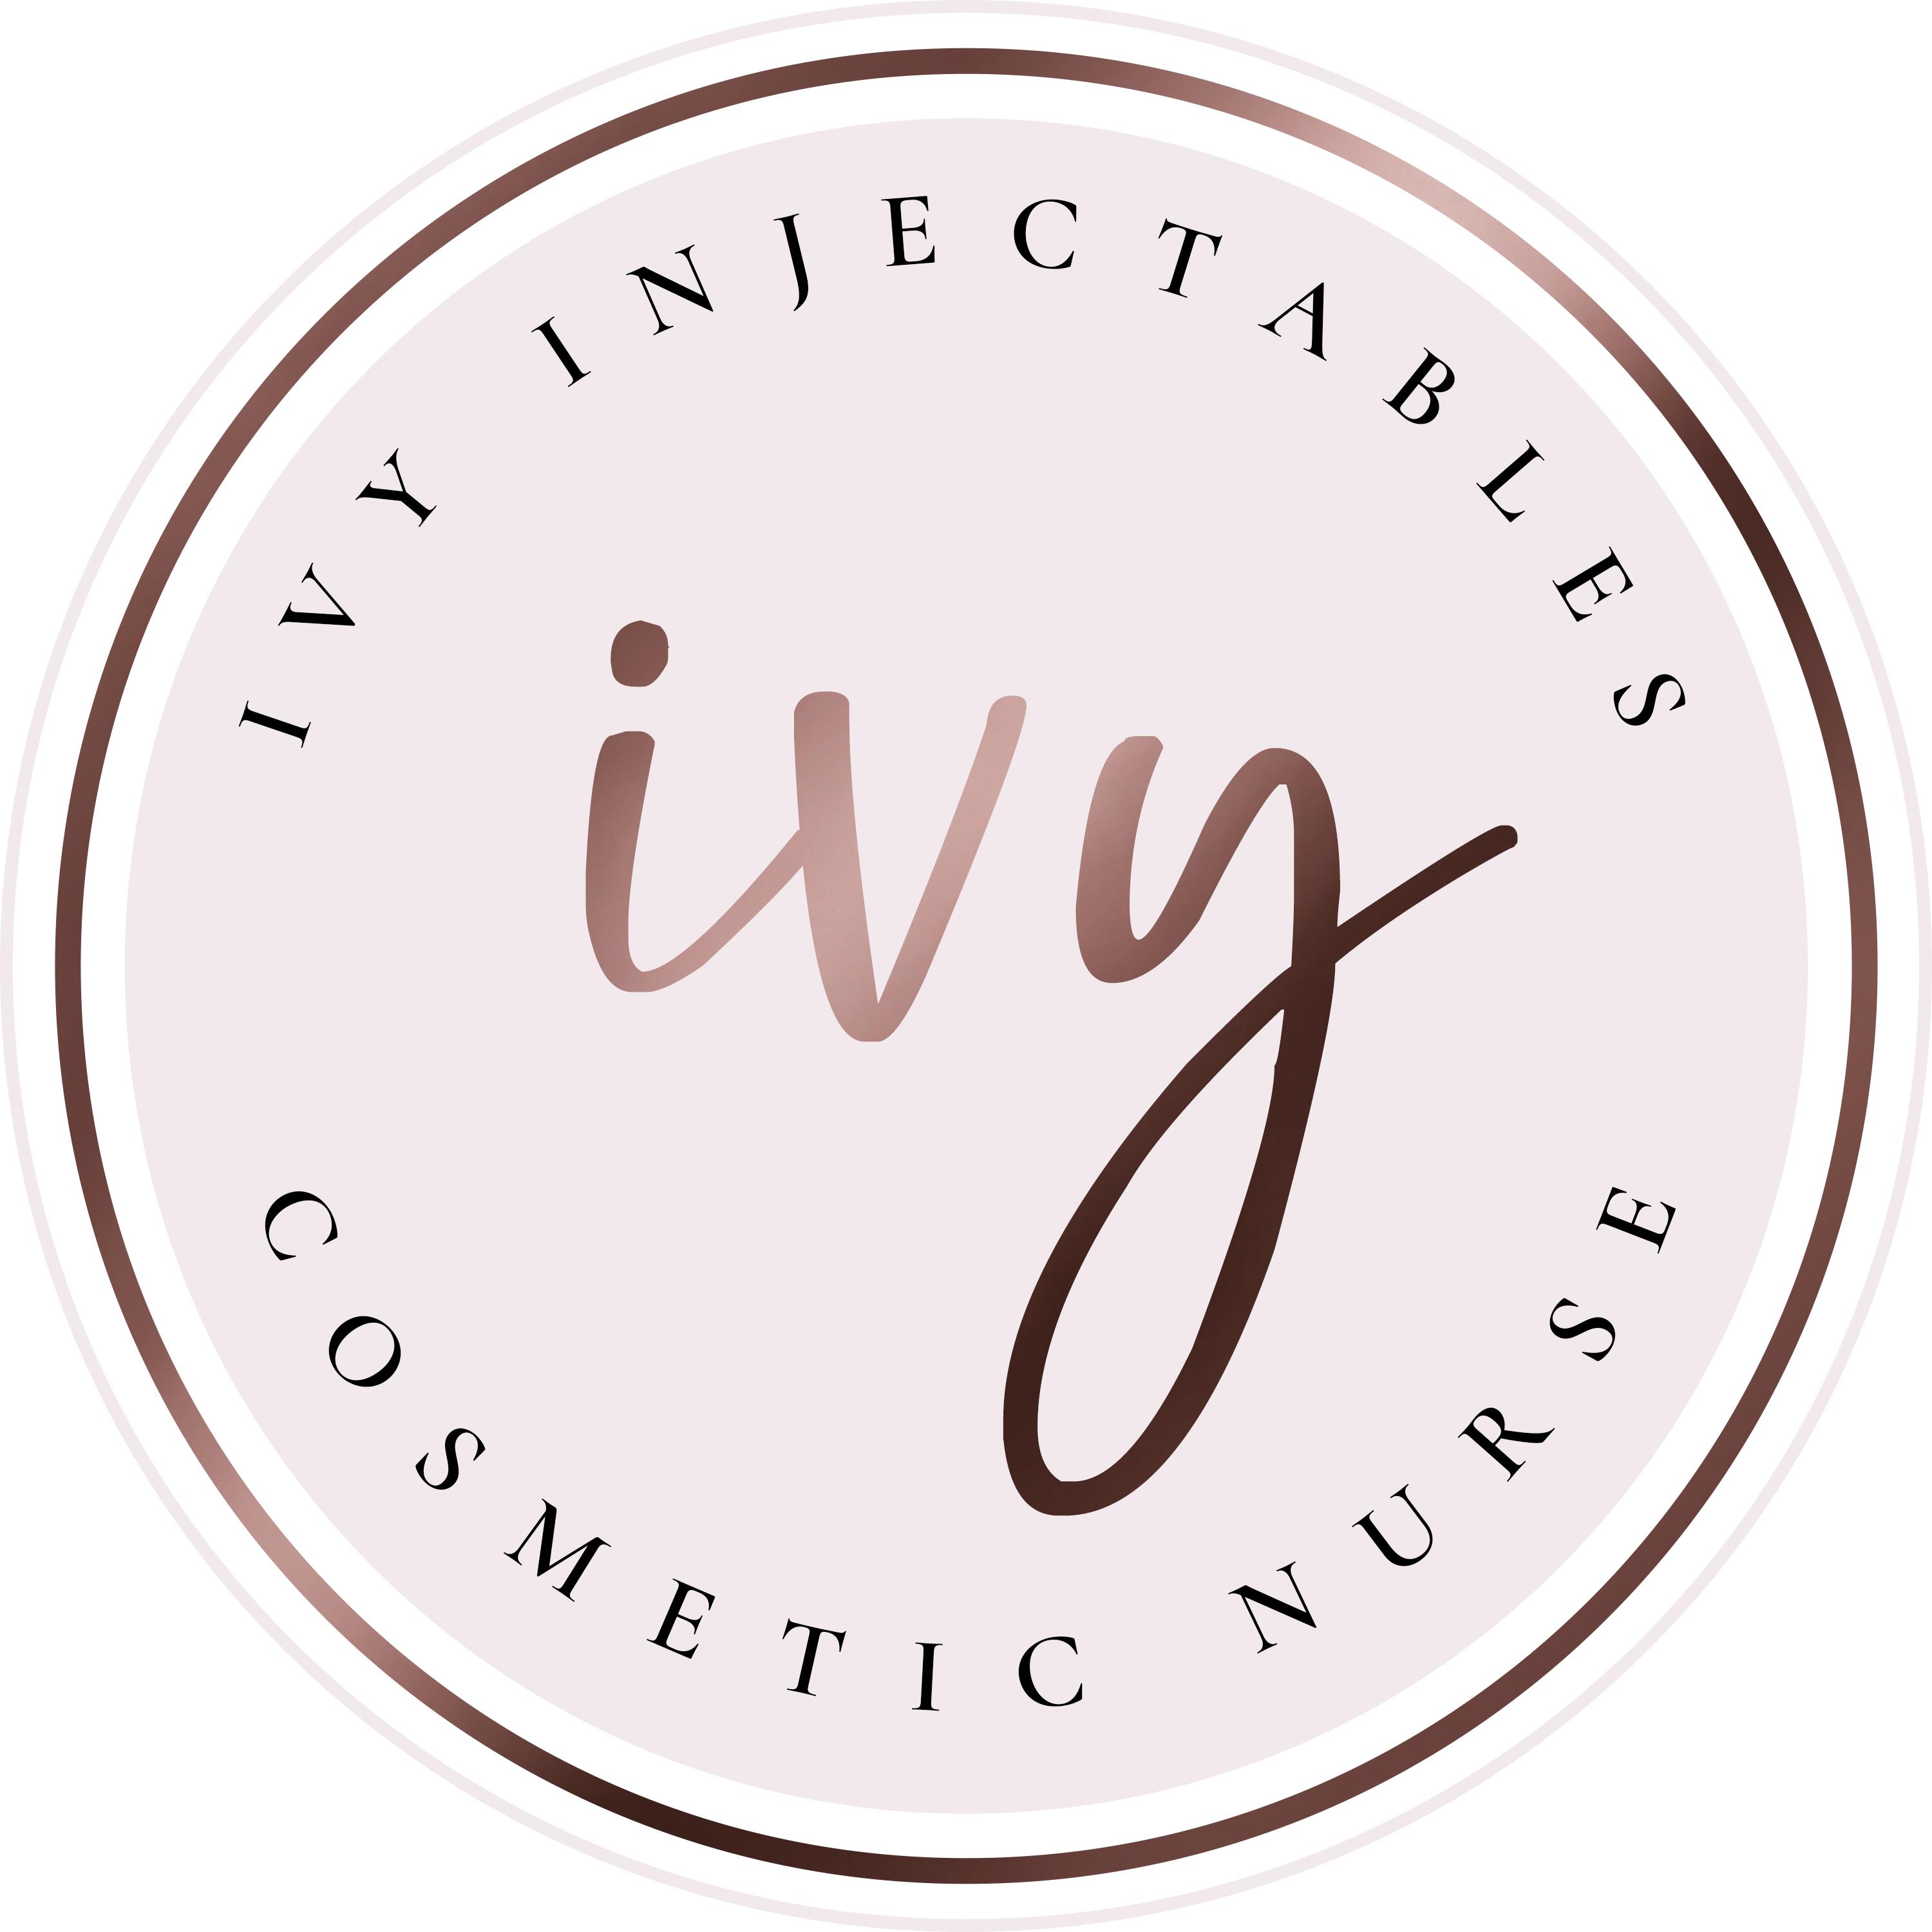 Ivy Injectables